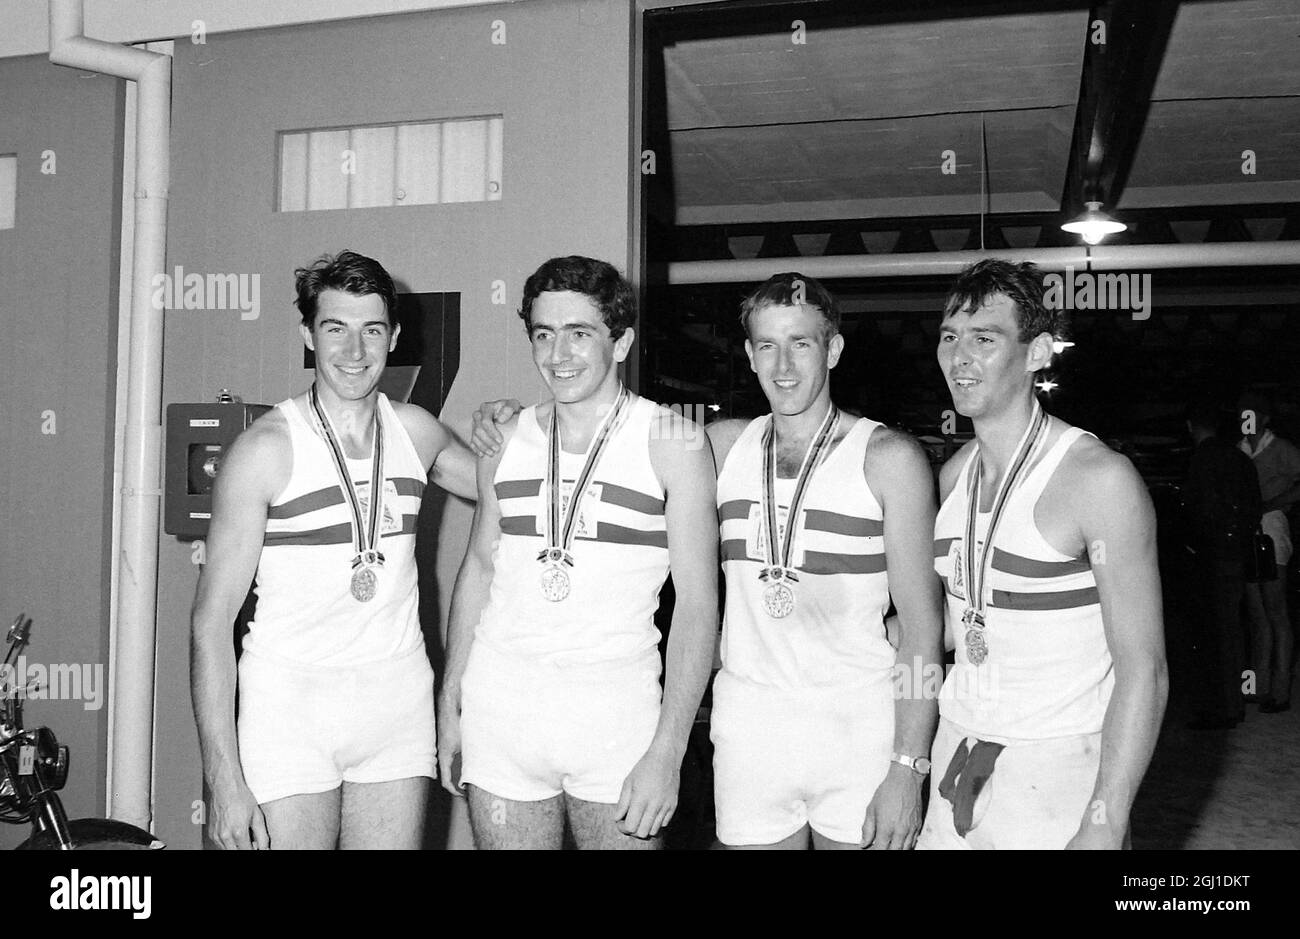 OLYMPICS, OLYMPIC SPORT GAMES - THE XVIII 18TH OLYMPIAD IN TOKYO, JAPAN - ROWING OLYMPICS BRITISH CREW WITH SILVER MEDALS  ;  17 OCTOBER 1964 Stock Photo